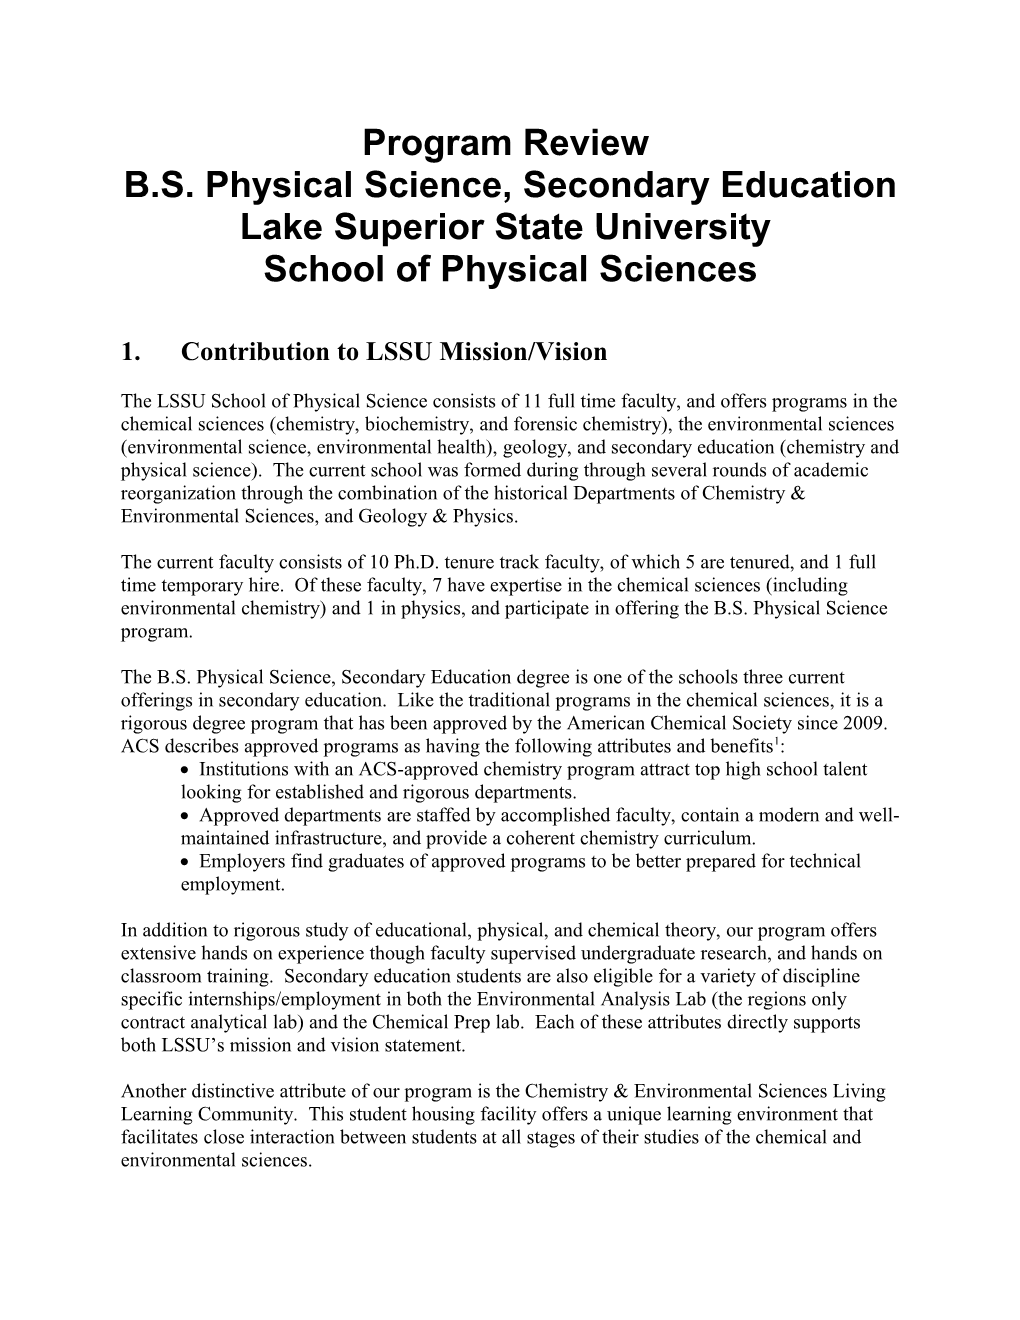 B.S. Physical Science, Secondary Education